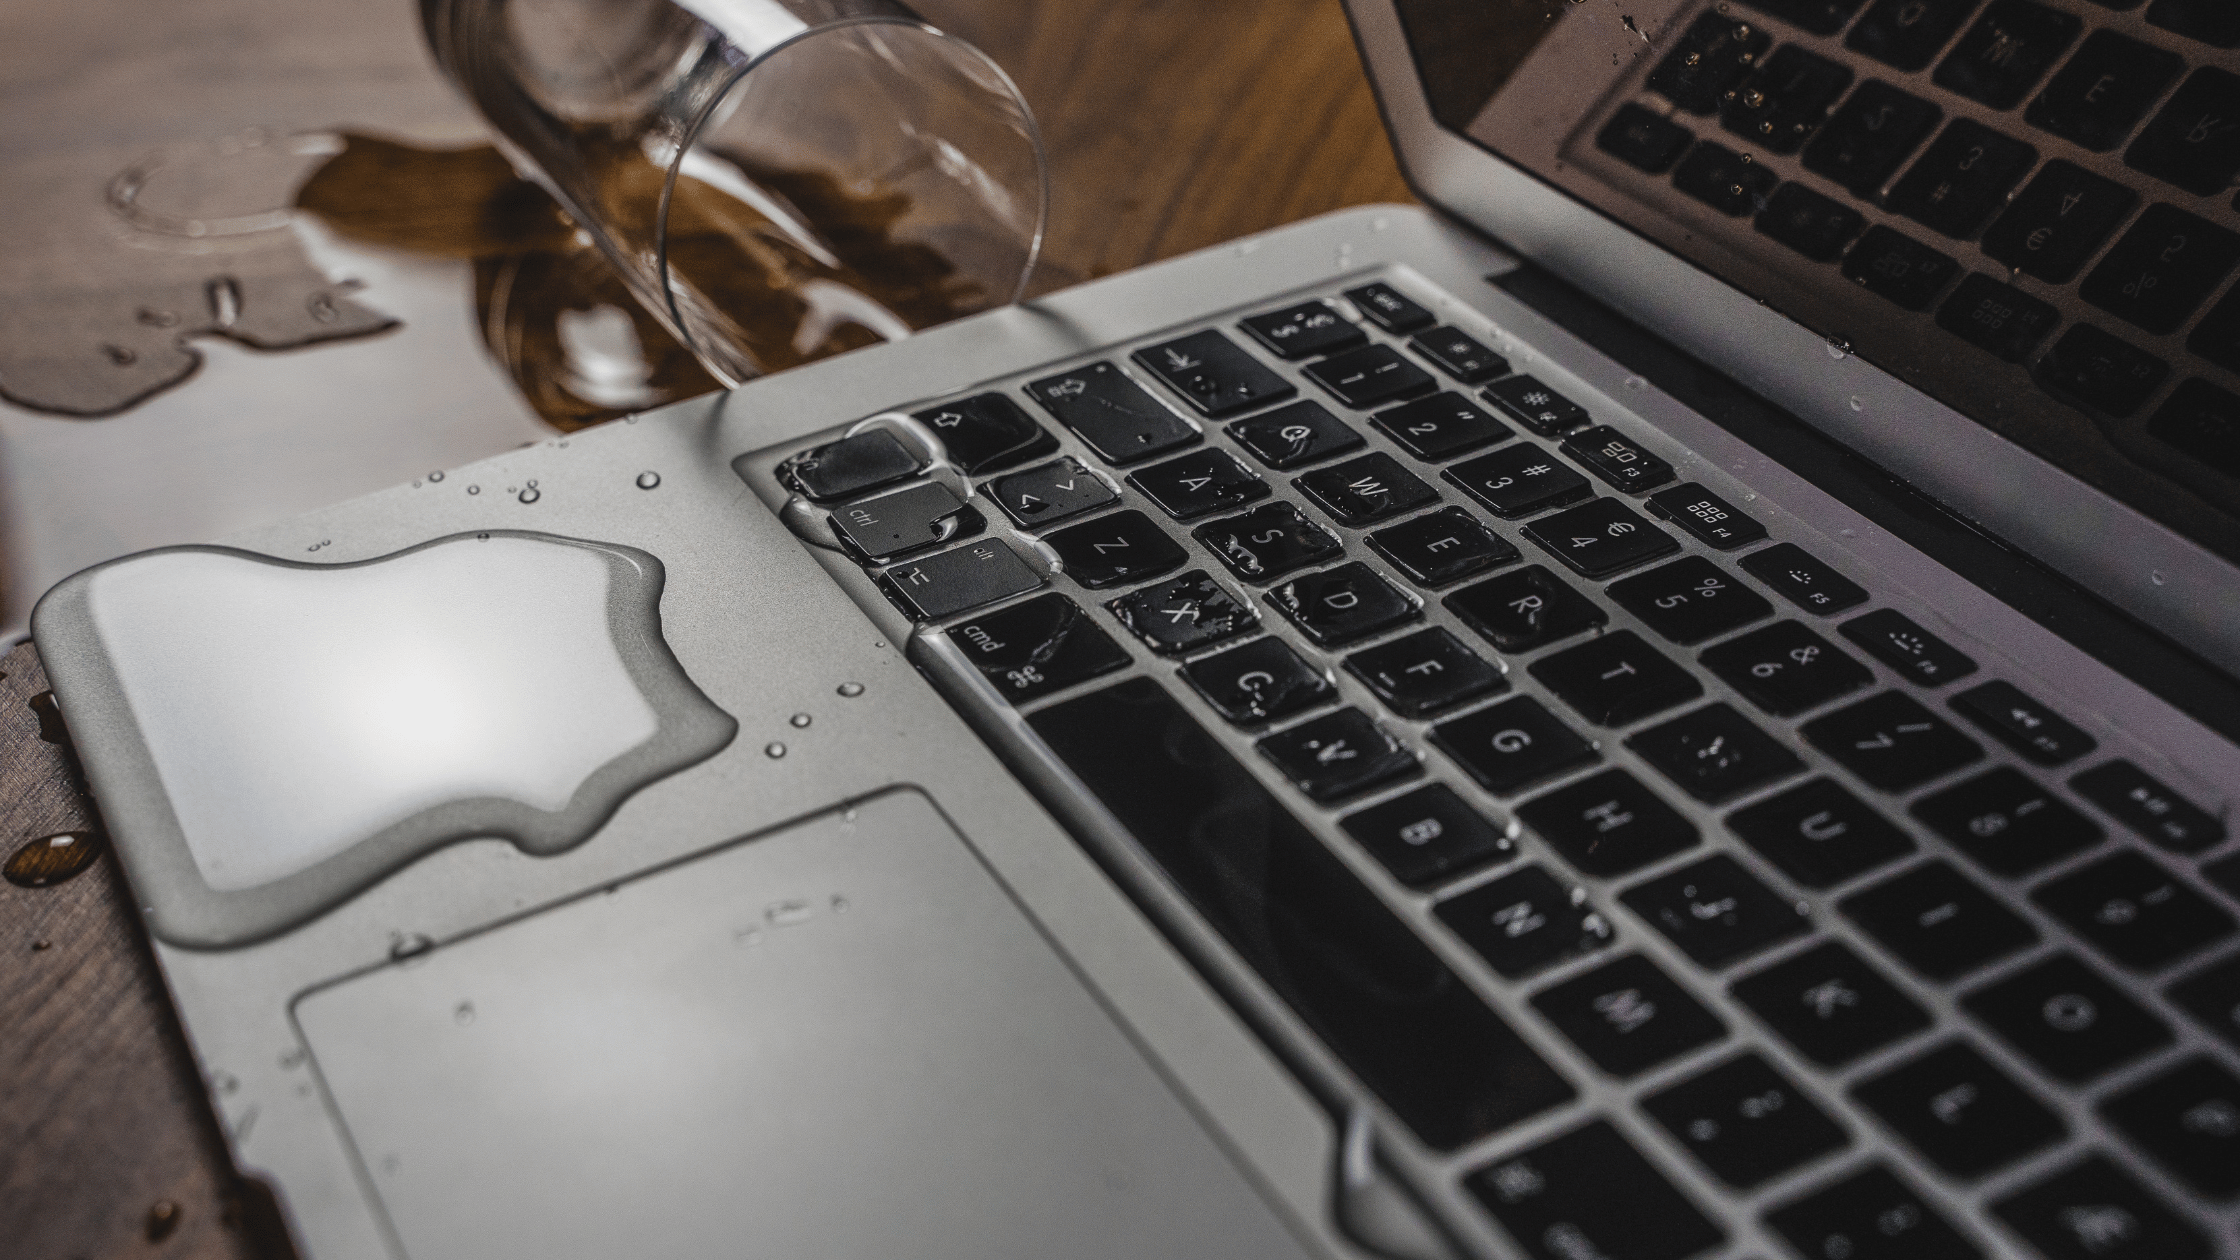 Cup of water spilling on macbook keyboard